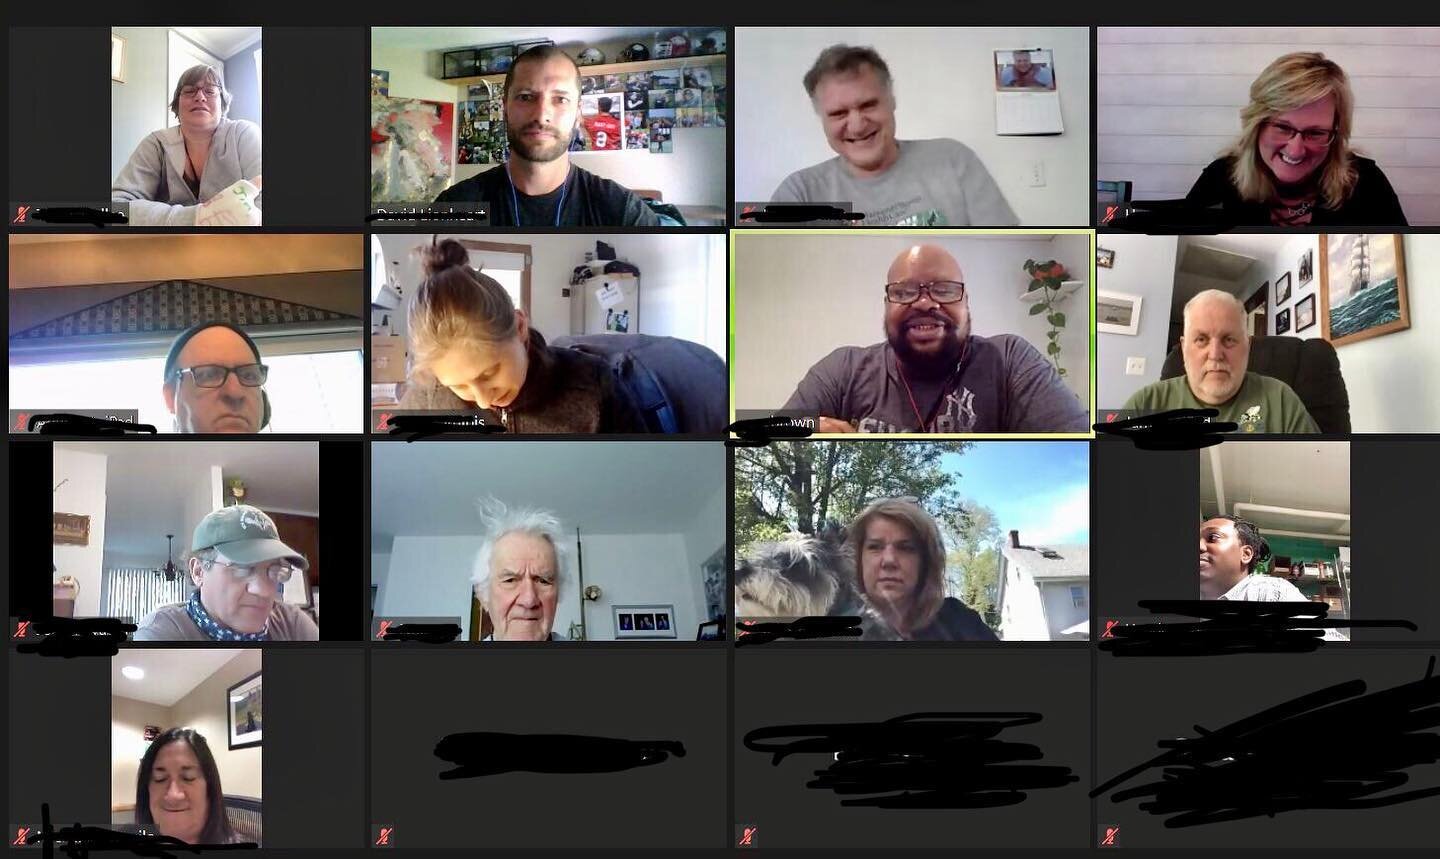 Virtual Wellness Workshop: 001

Yesterday we launched our pilot for a motivational talking series directly with the hospitals and veterans within the community around those hospitals that we normally service in person. It was an honor to host the ser